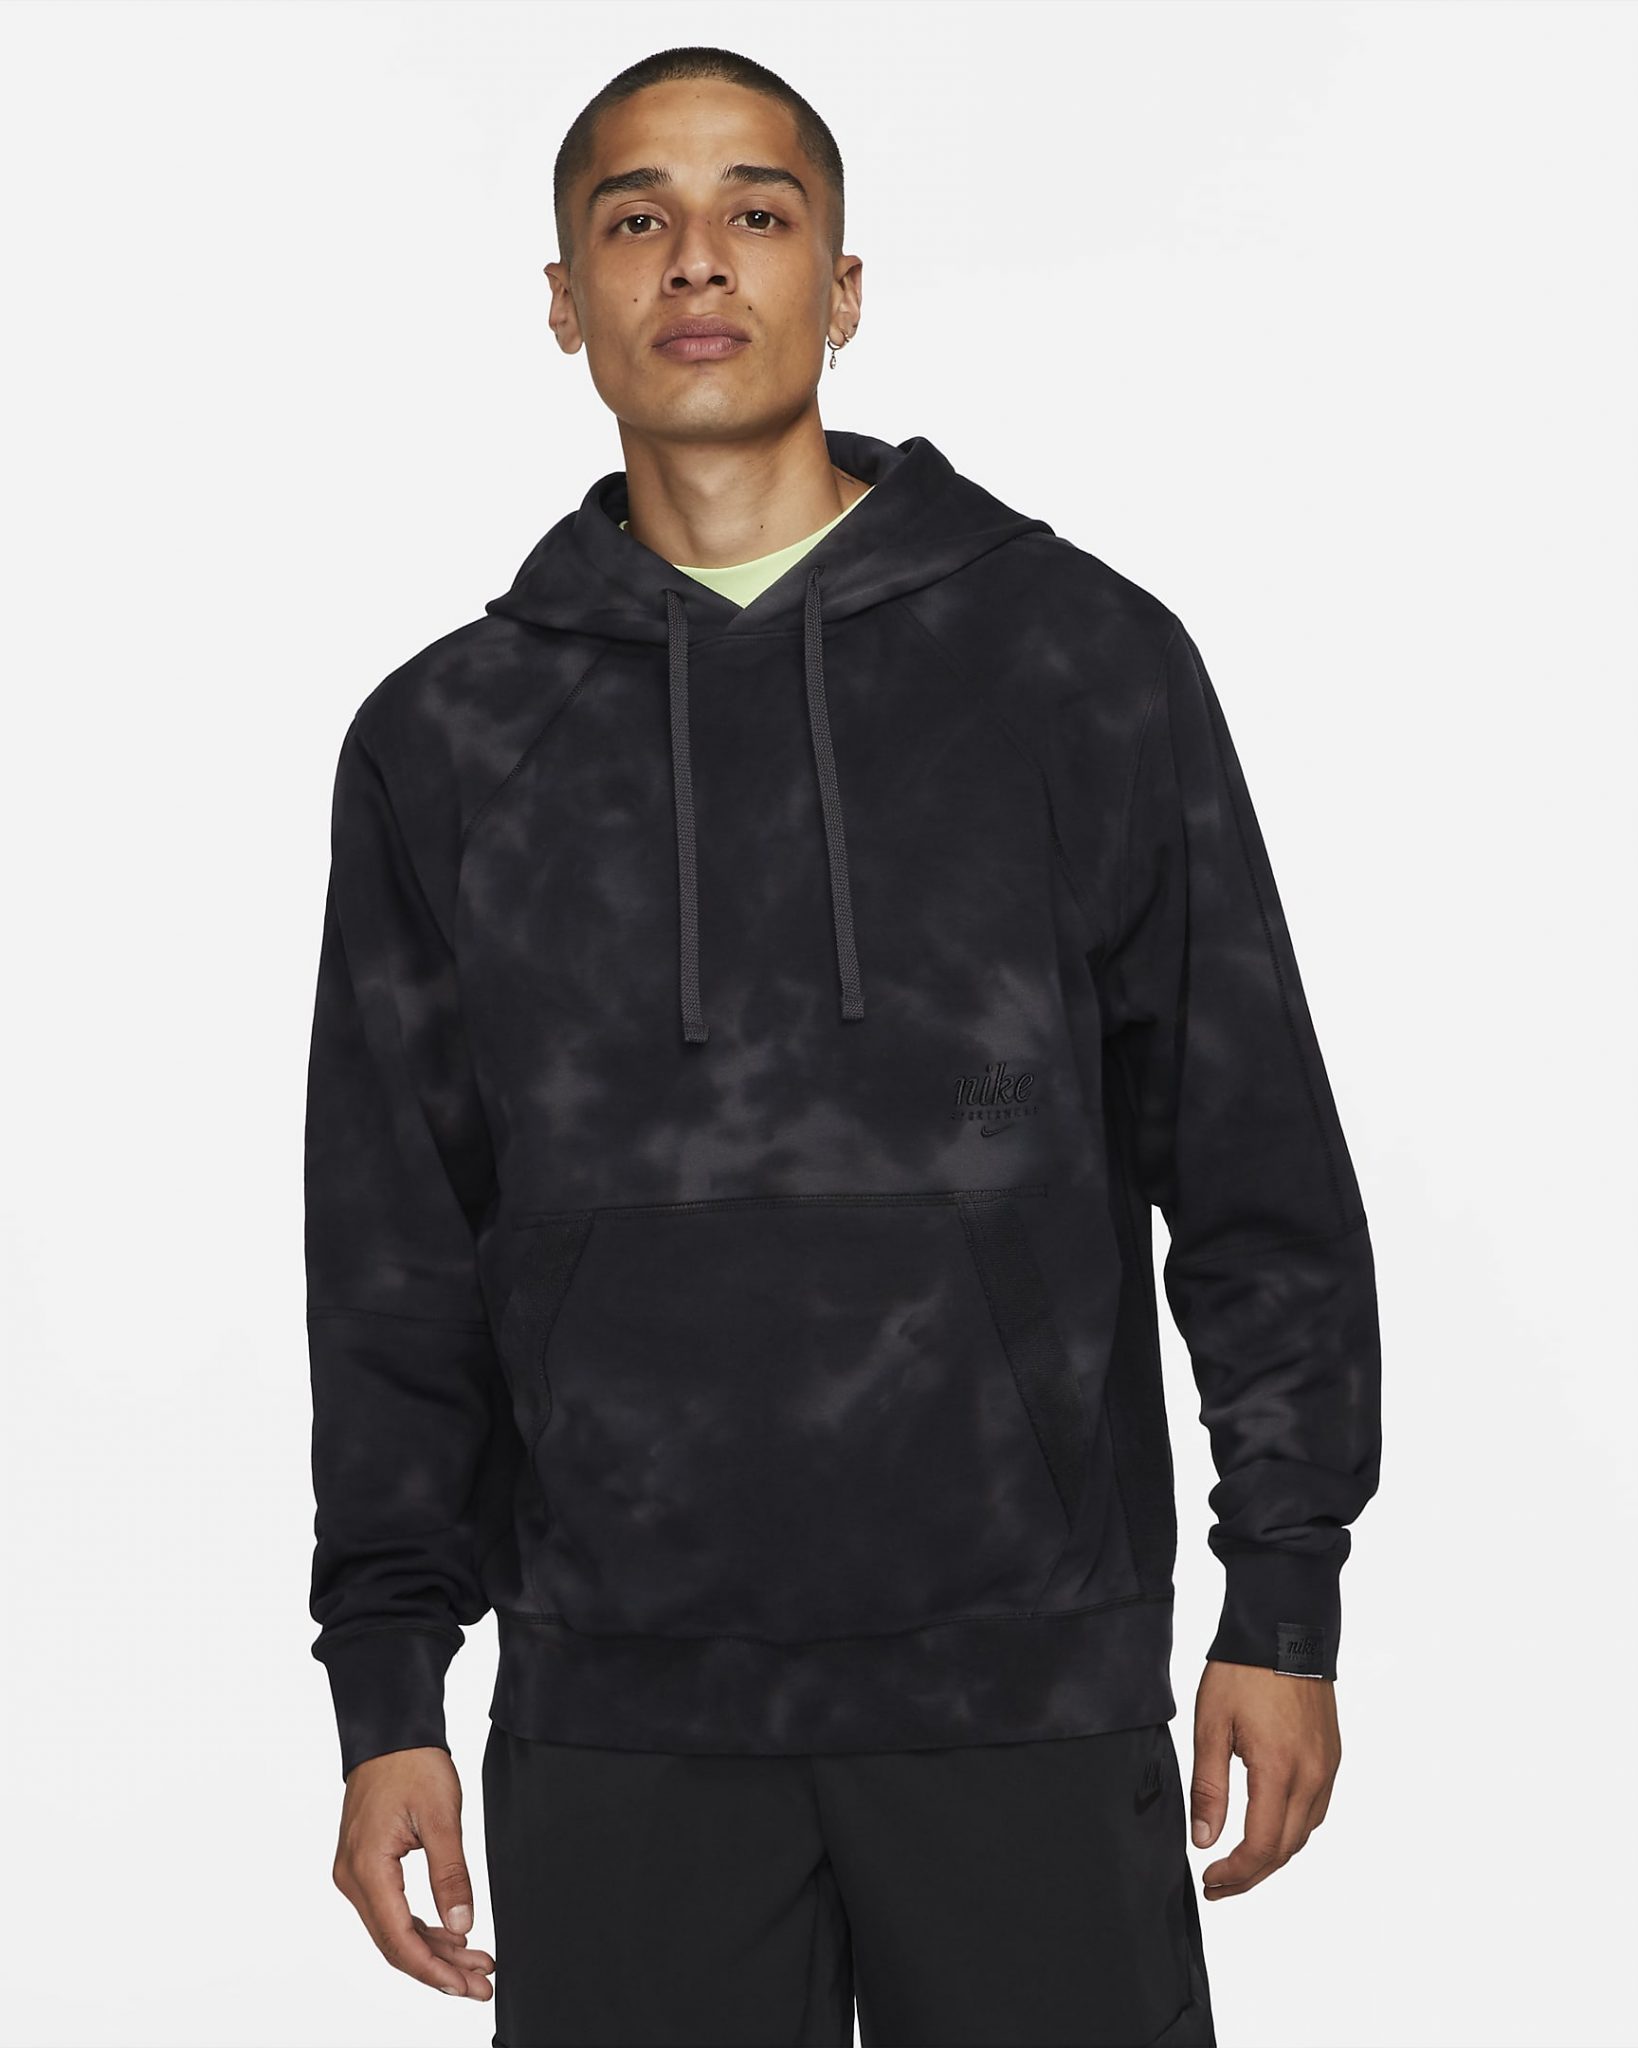 Nike Air Tuned Max Celery Dark Charcoal Shirts and Outfits